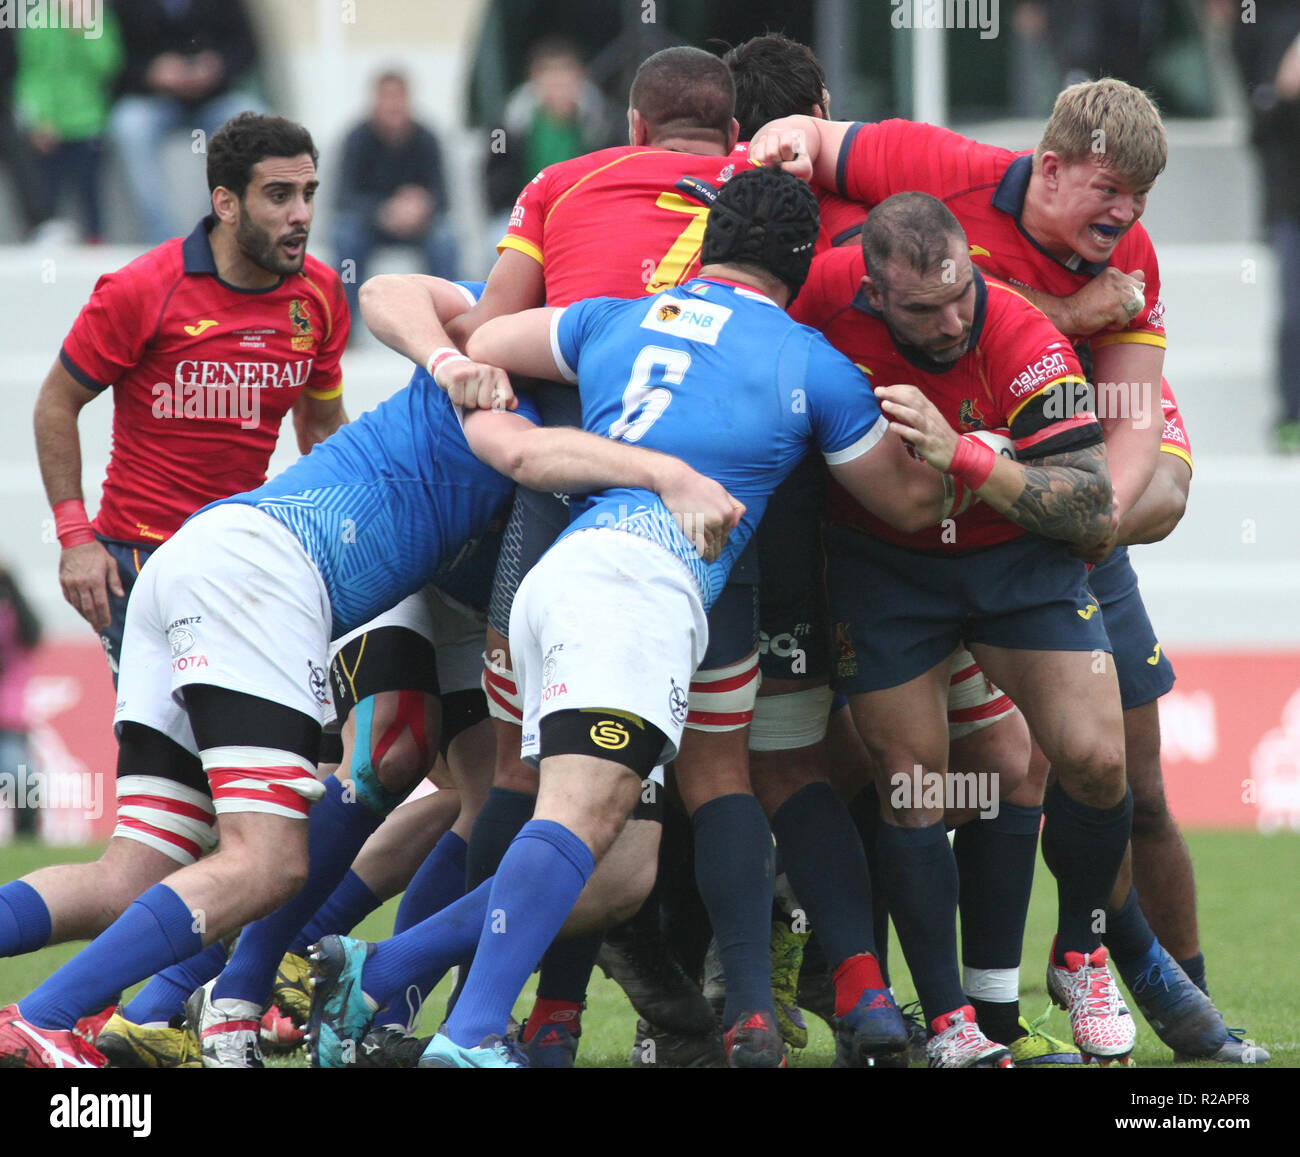 Madrid, Spain. 18/11/2018, Rugby Test Match Lopez Fernando,Kitshoff Rohan,Sabchez Victor And Peters Joshua in game actions between Spain-Namibia to Universidad Complutence Stadium,to Madrid Spain. Credit: Leo Cavallo/Alamy Live News Stock Photo